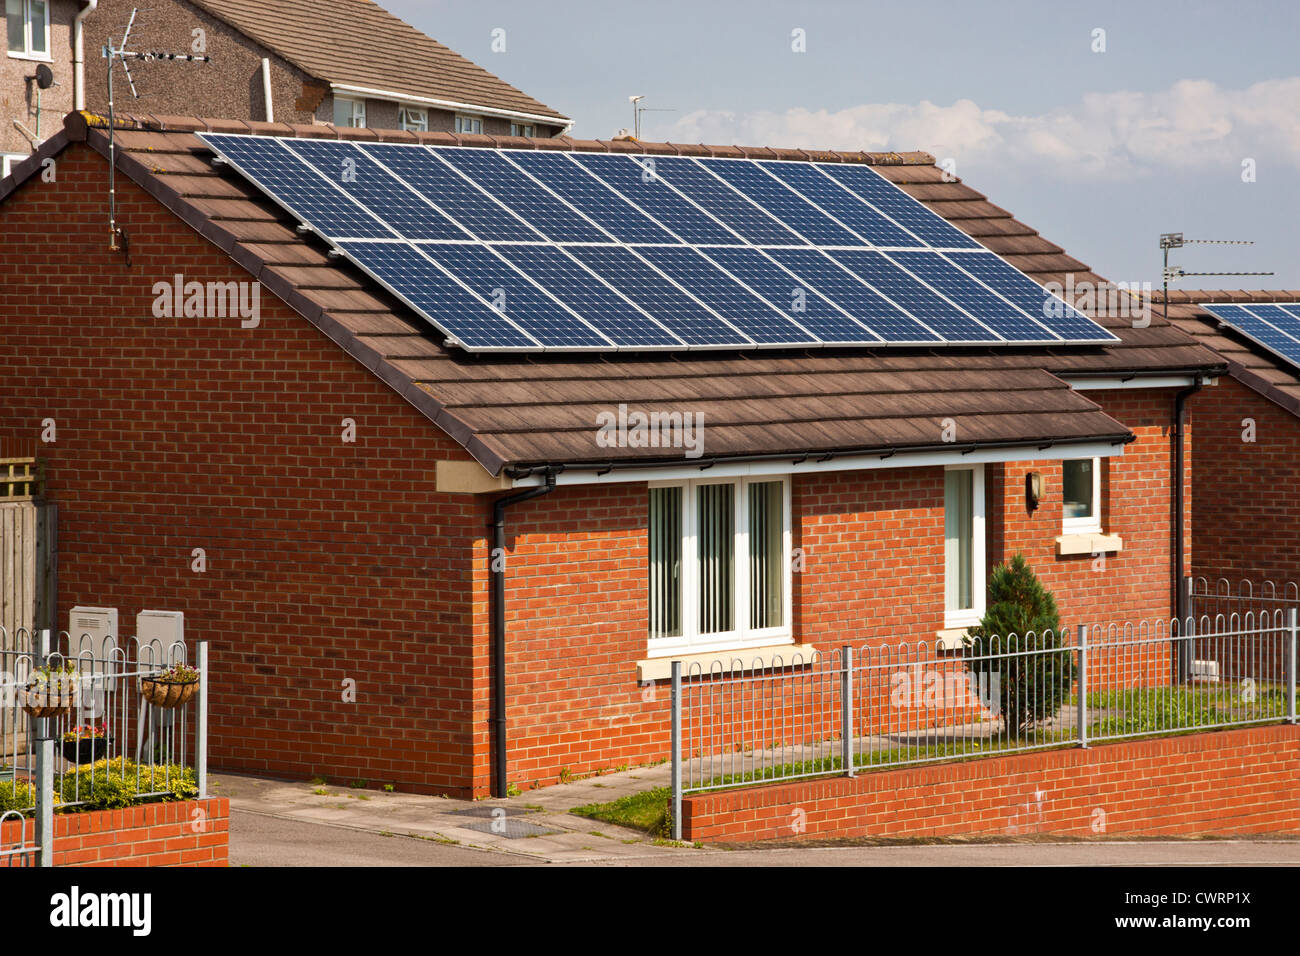 Solar pv photovoltaic panels on bungalows, creating free electricity. Stock Photo